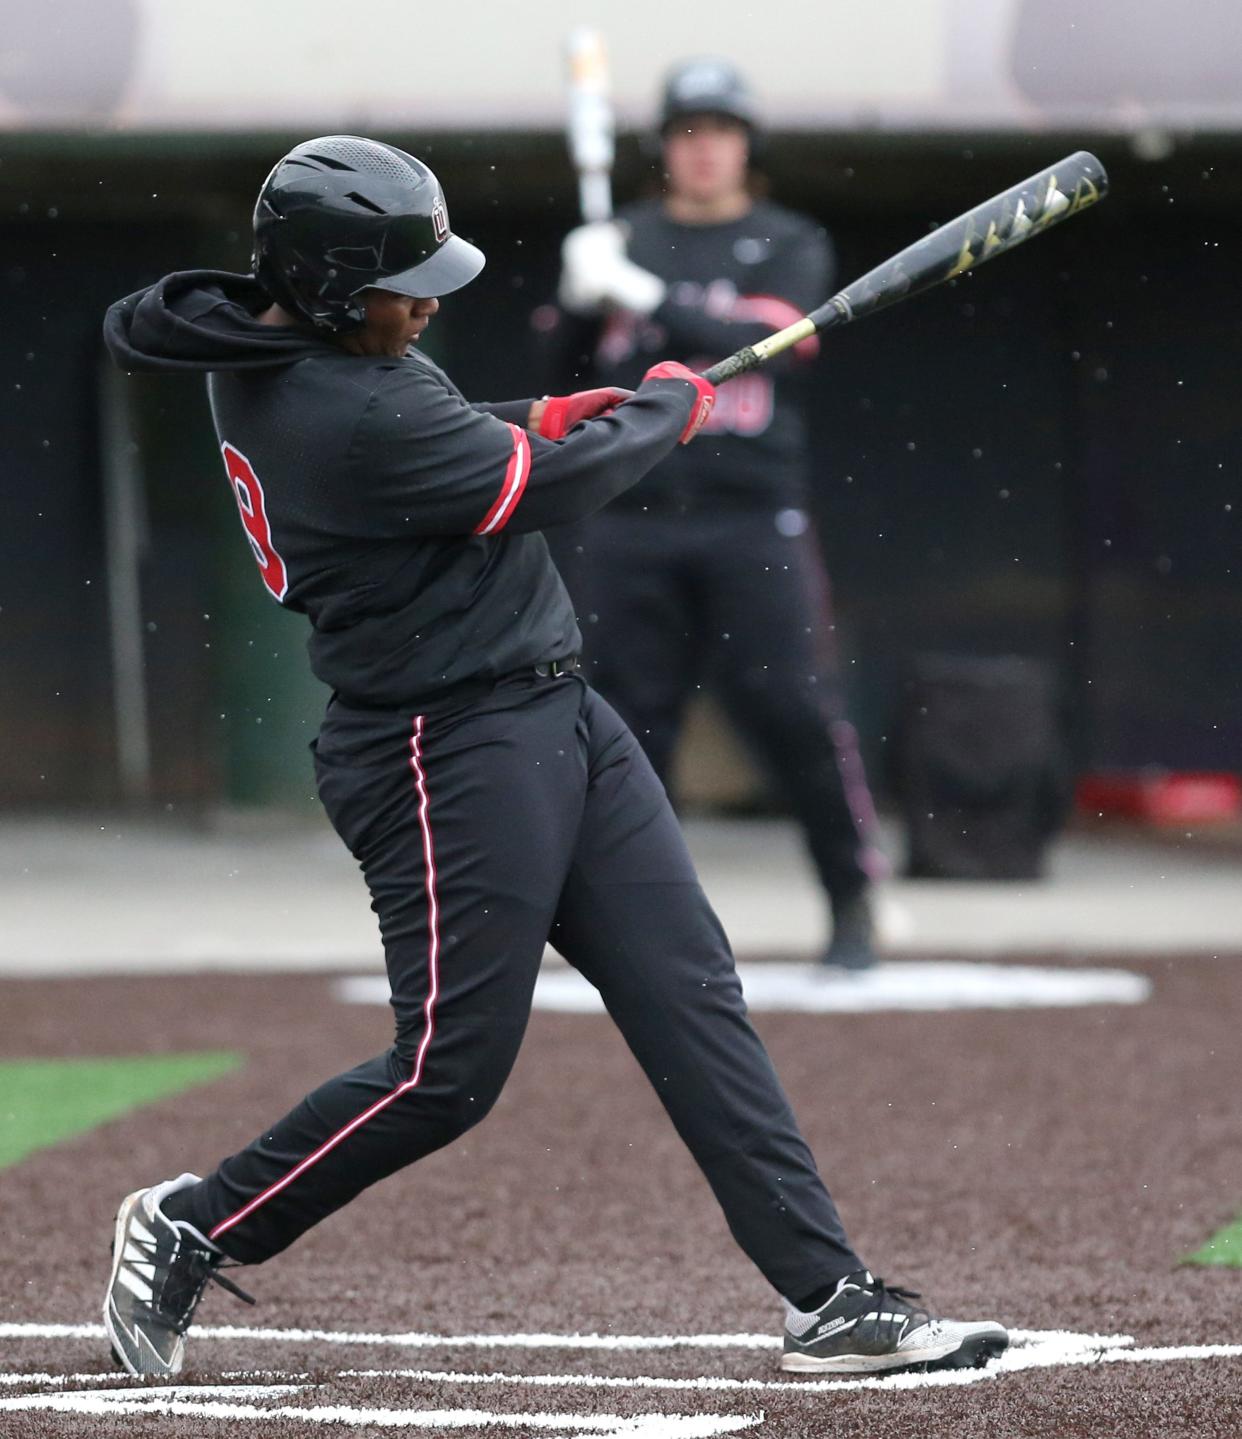 Savian Wilkins of McKinley drives in a run during their game against Canton South at McKinley on Friday, April 1, 2022.